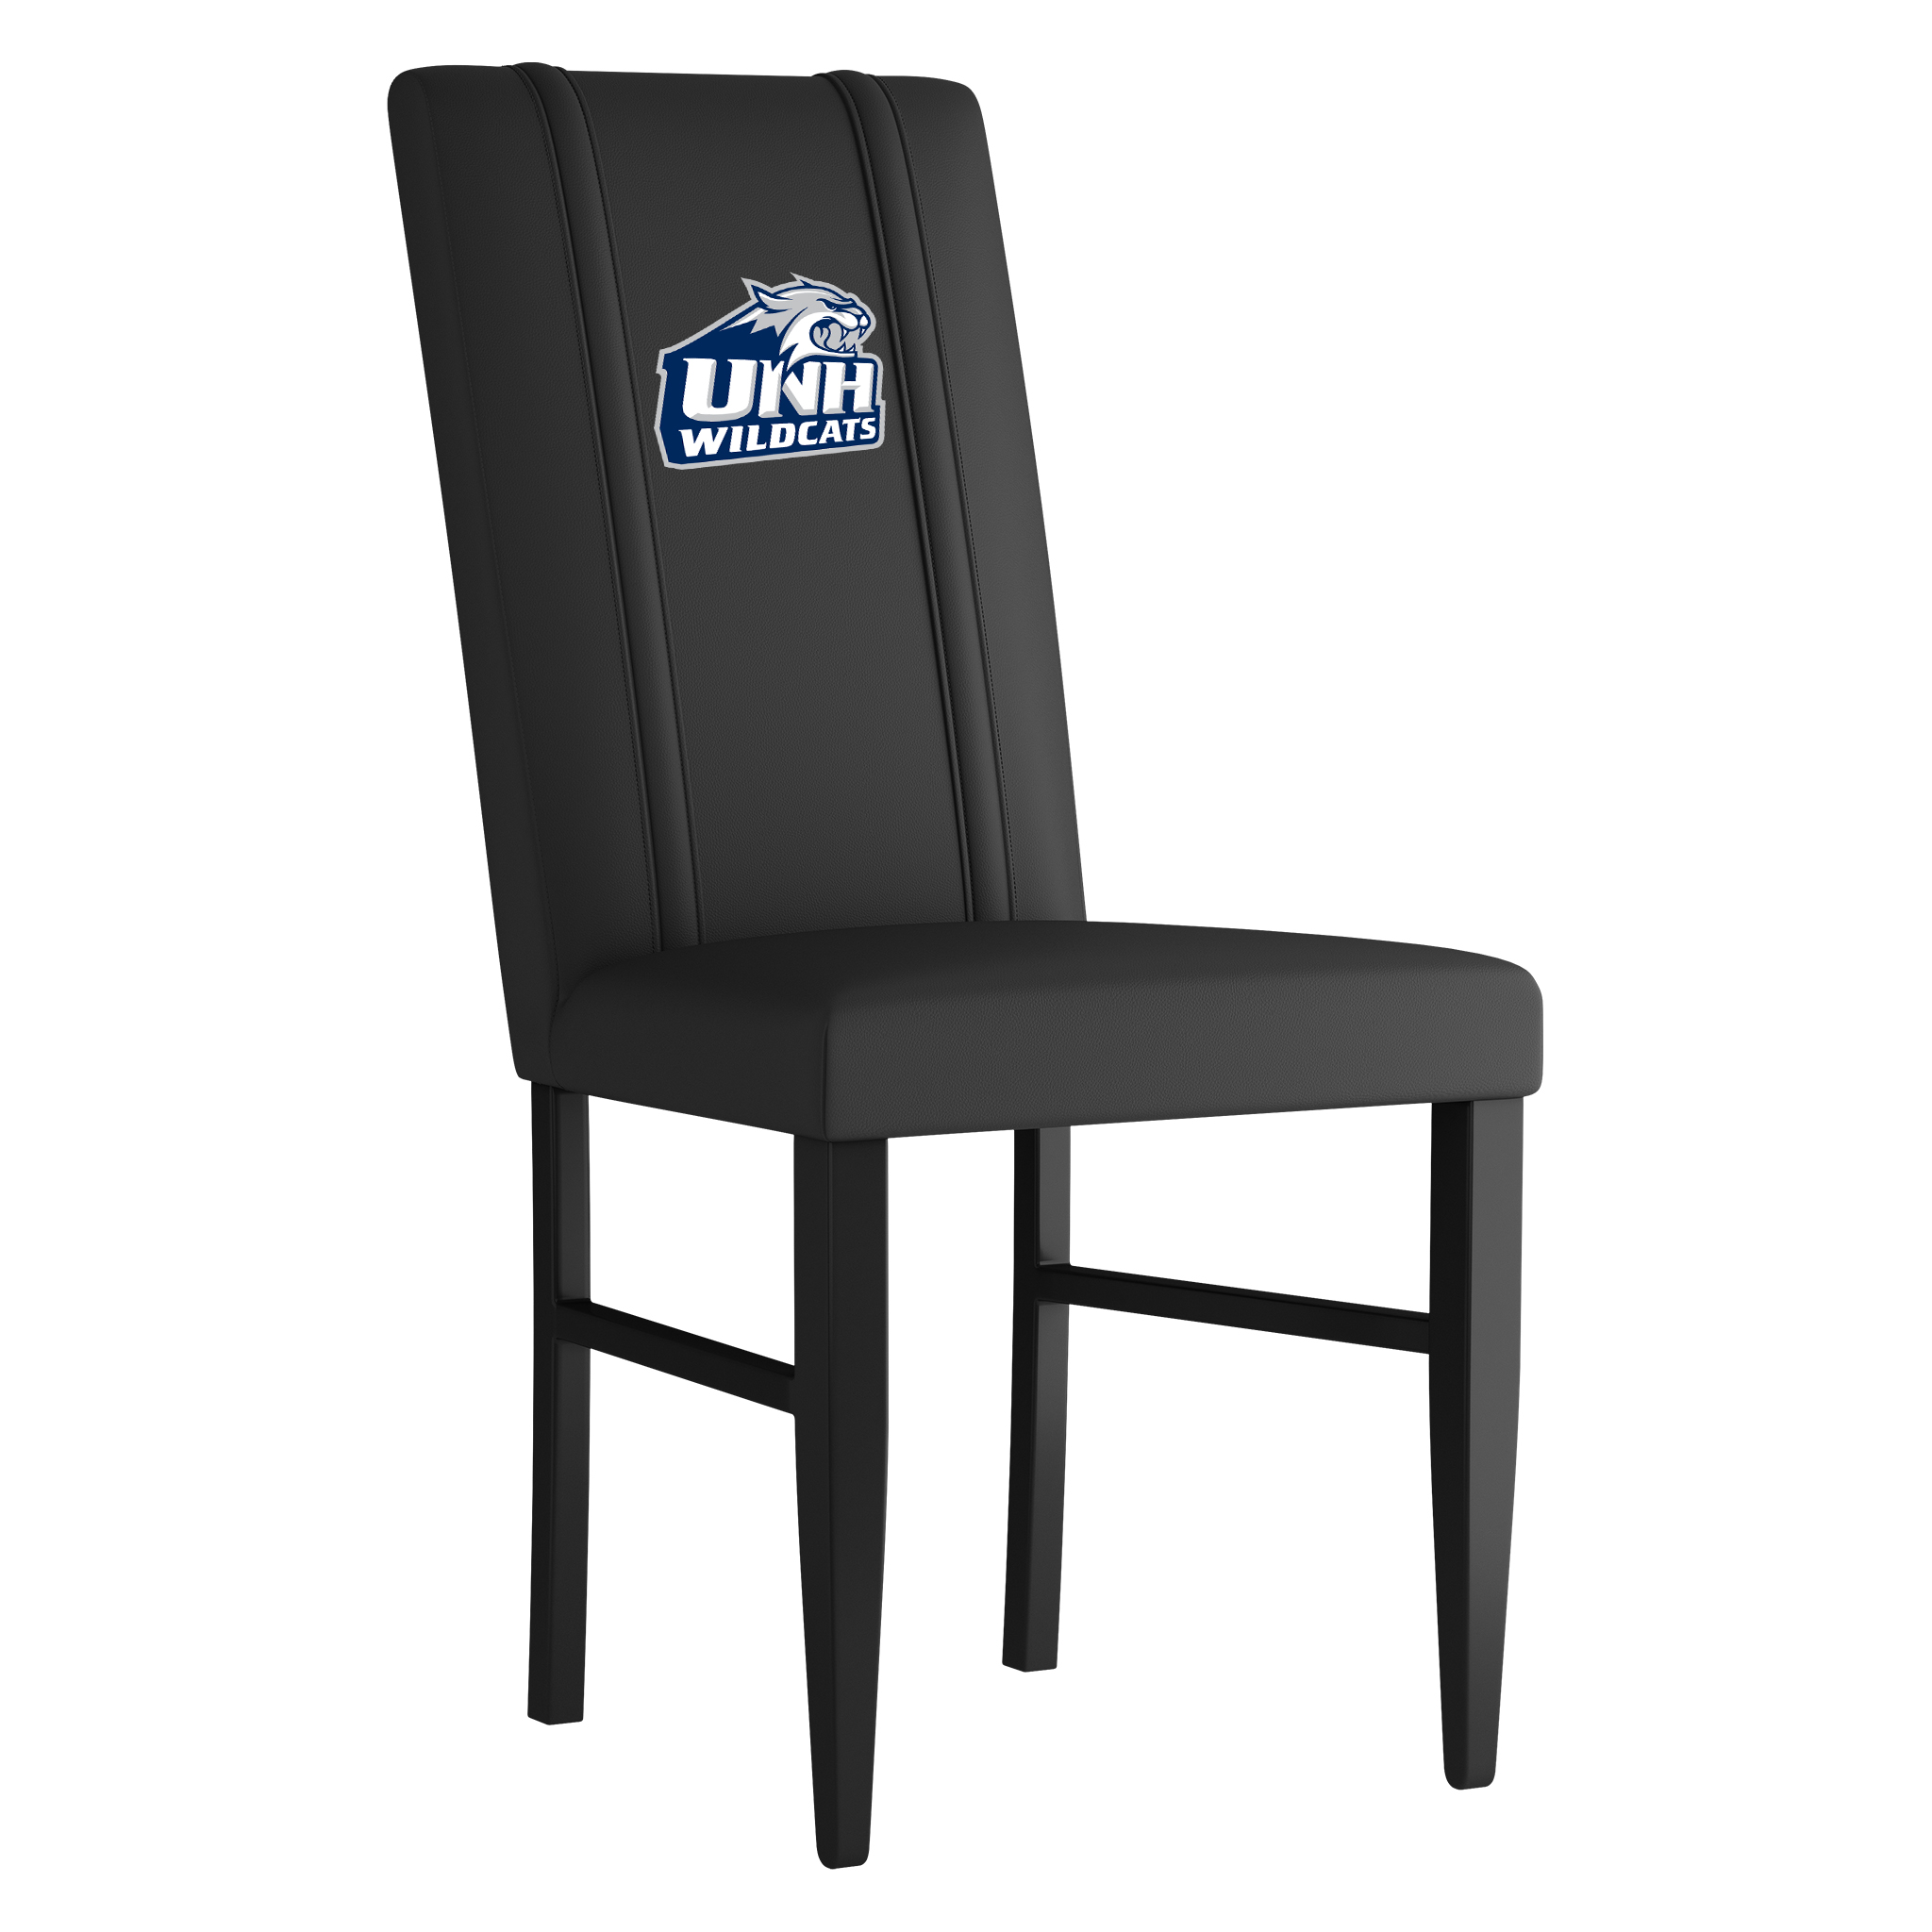 New Hampshire Wildcats Side Chair 2000 With New Hampshire Wildcats Logo